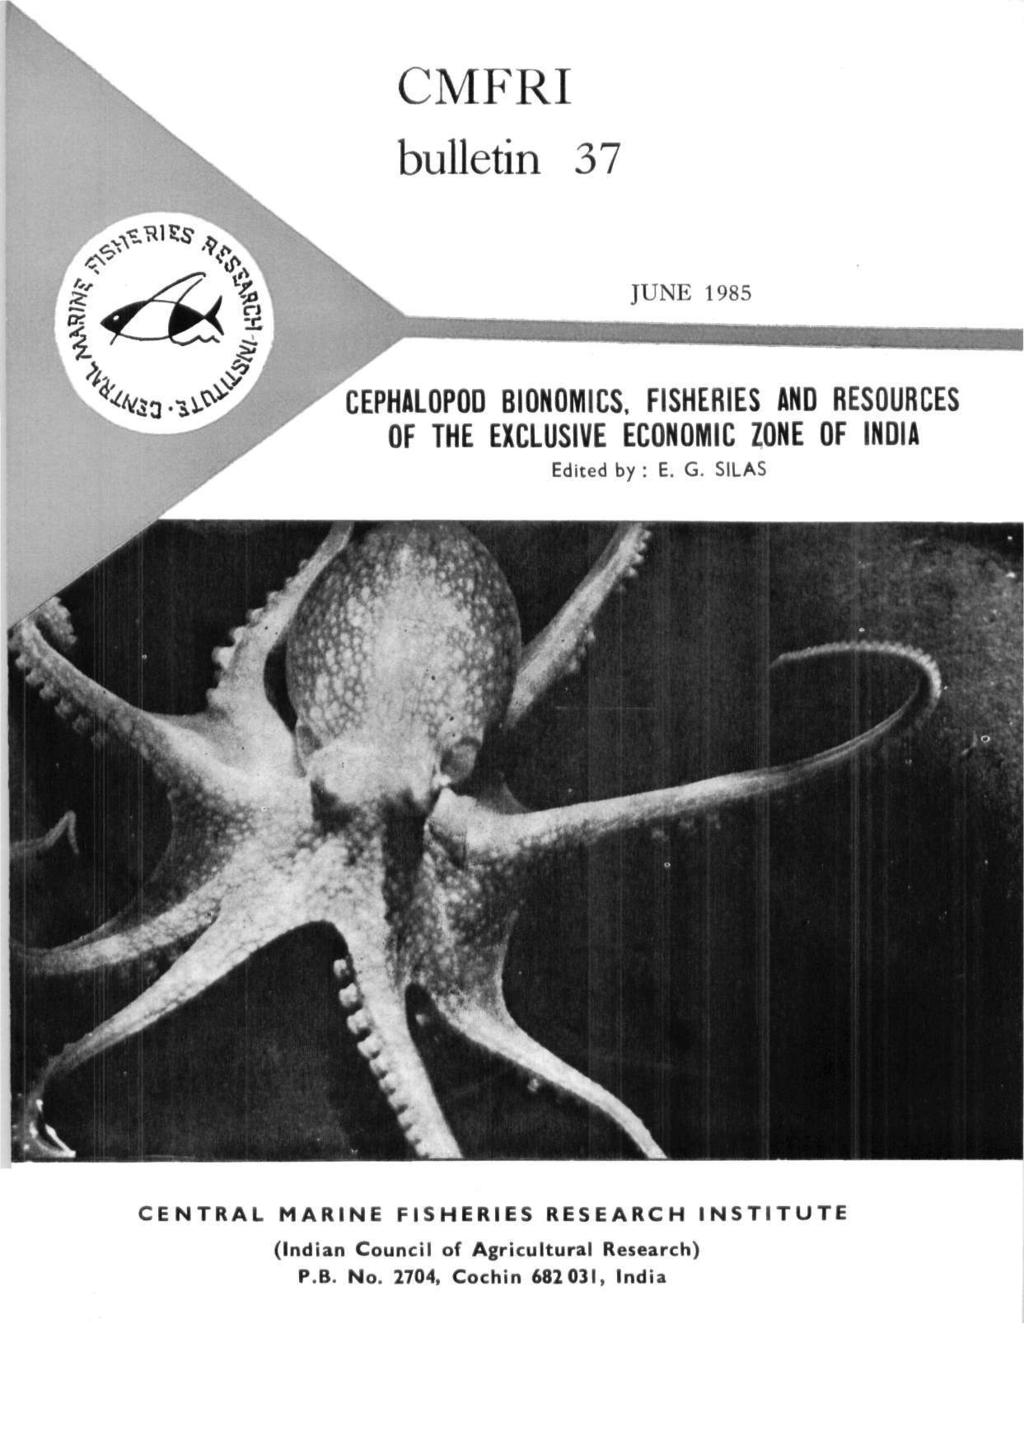 bulletin 37 <y J*^^.^n.^\.^^' CEPHALOPOD BIONOMICS. FISHERIES AND RESOURCES OF THE EXCLUSIVE ECONOMIC ZONE OF INDIA Edited by : E.